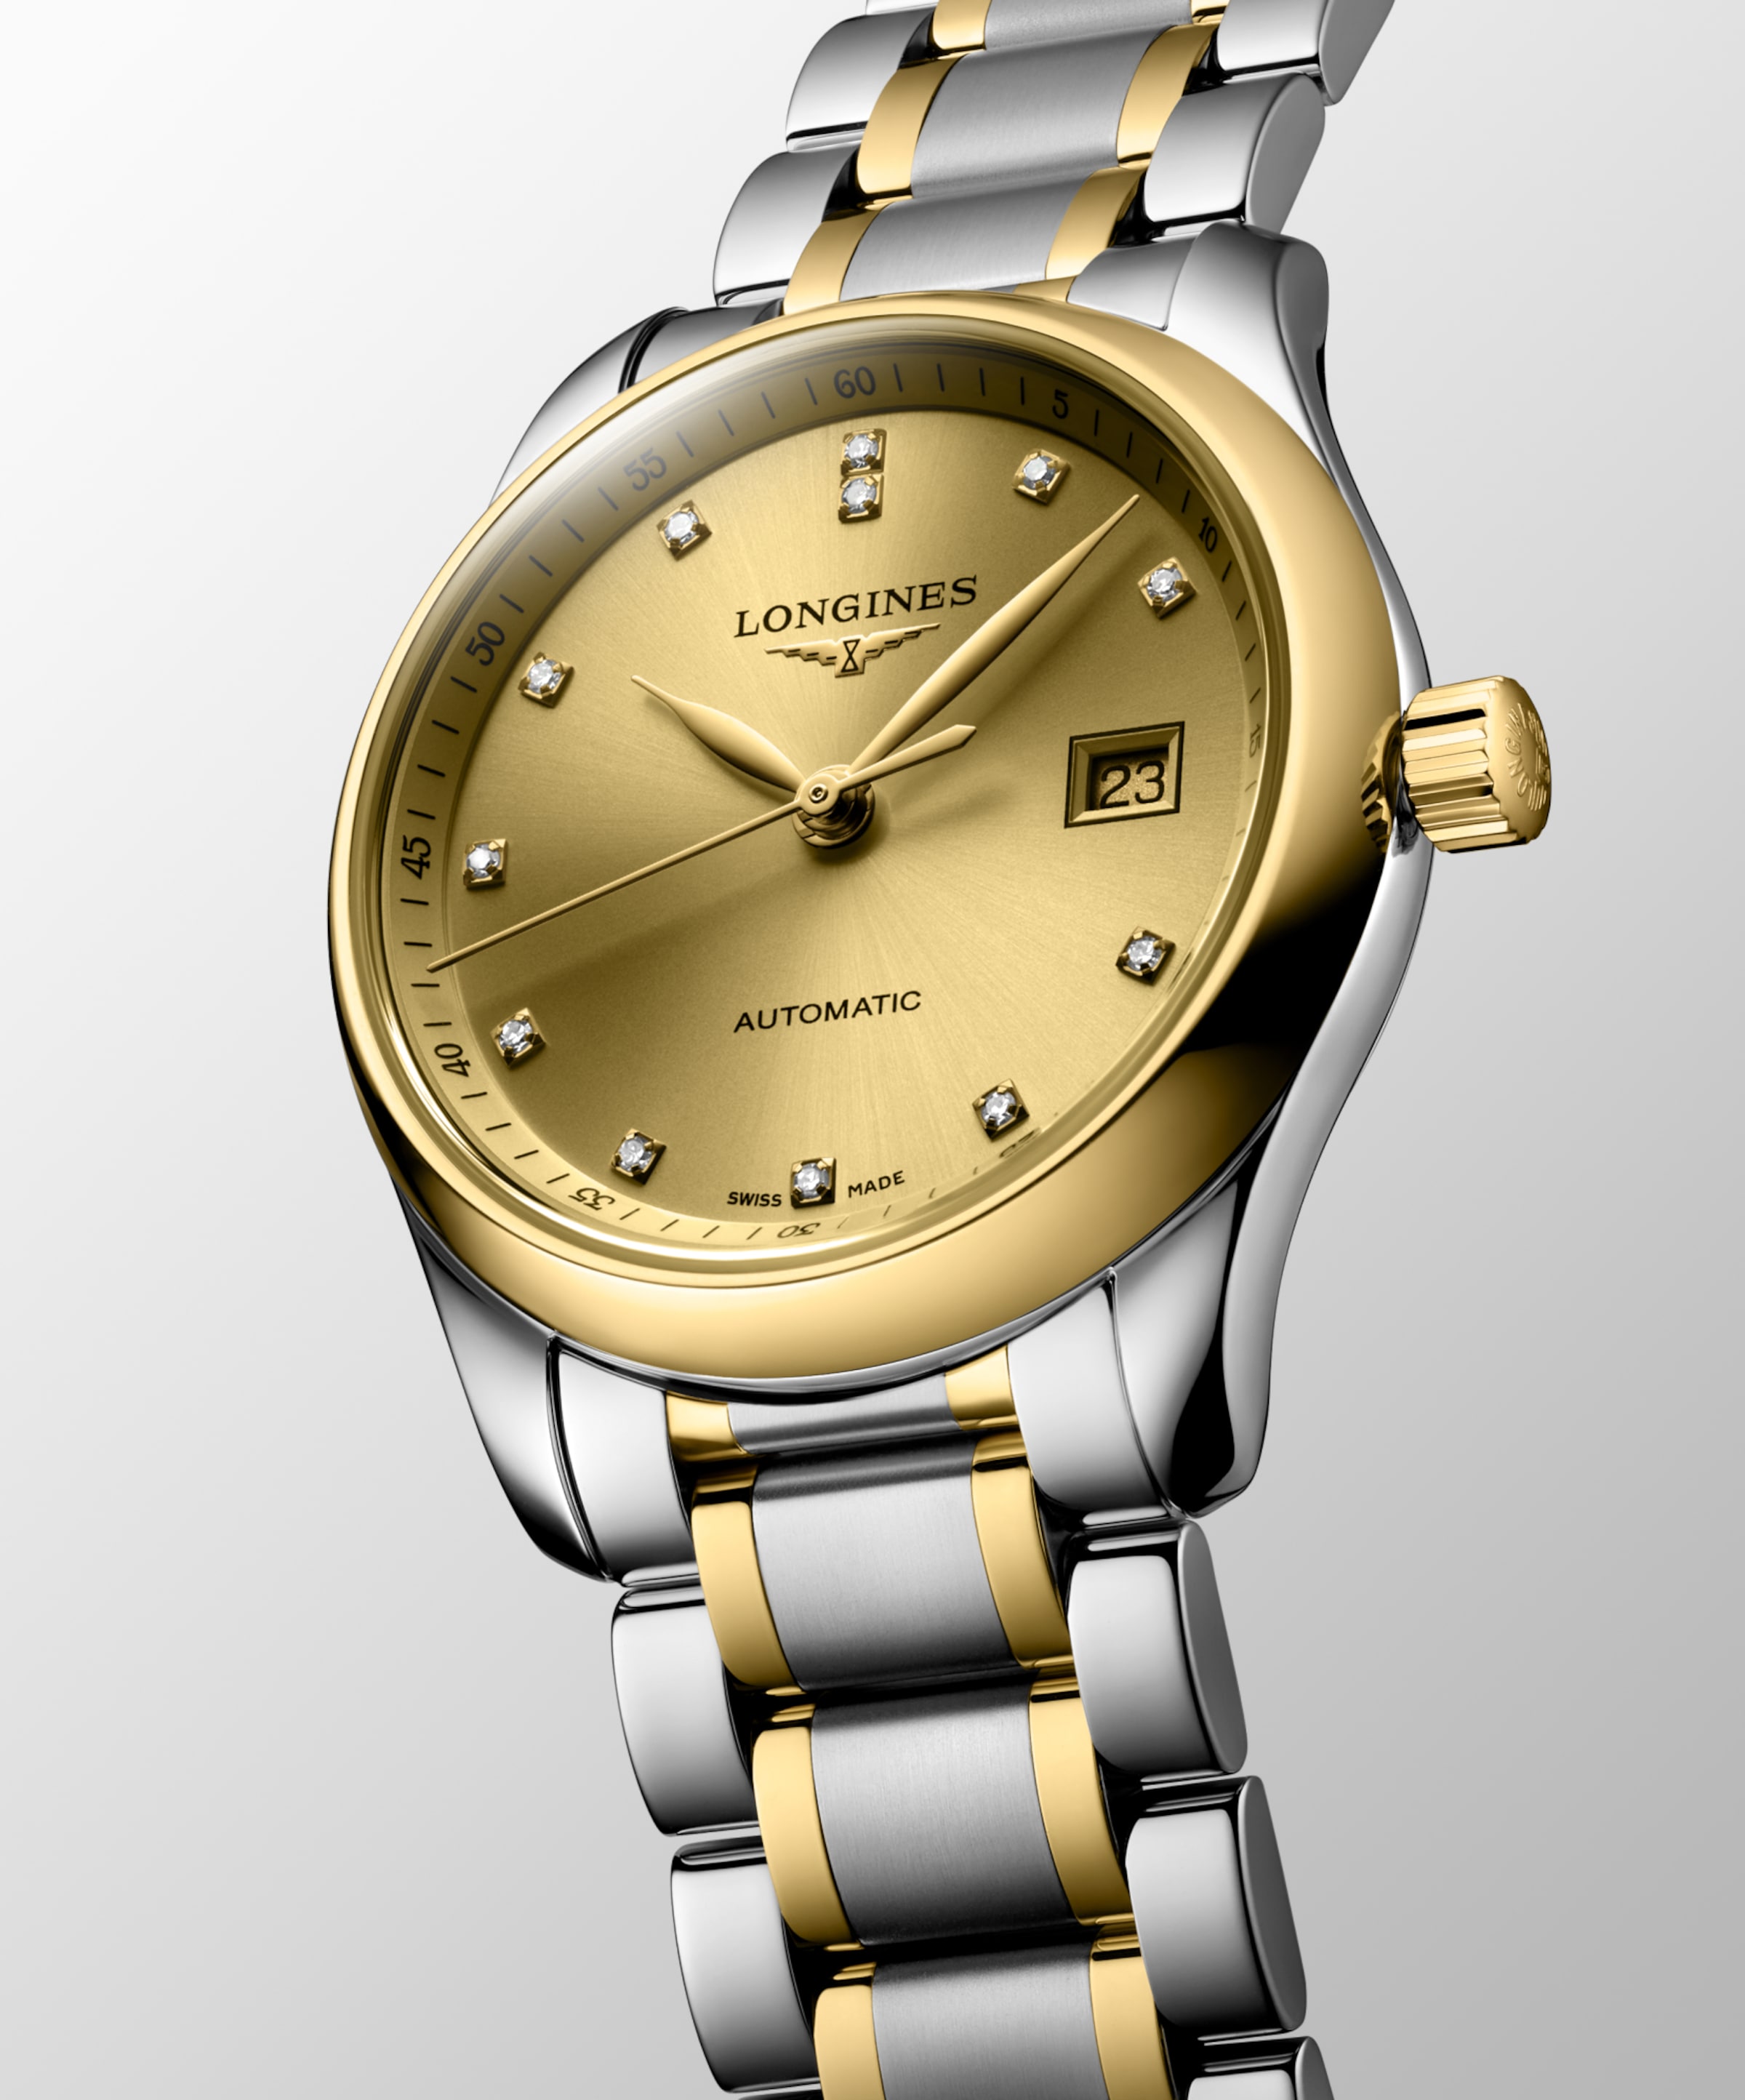 Longines MASTER COLLECTION Automatic Stainless steel and 18 karat yellow gold cap 200 Watch - L2.257.5.37.7